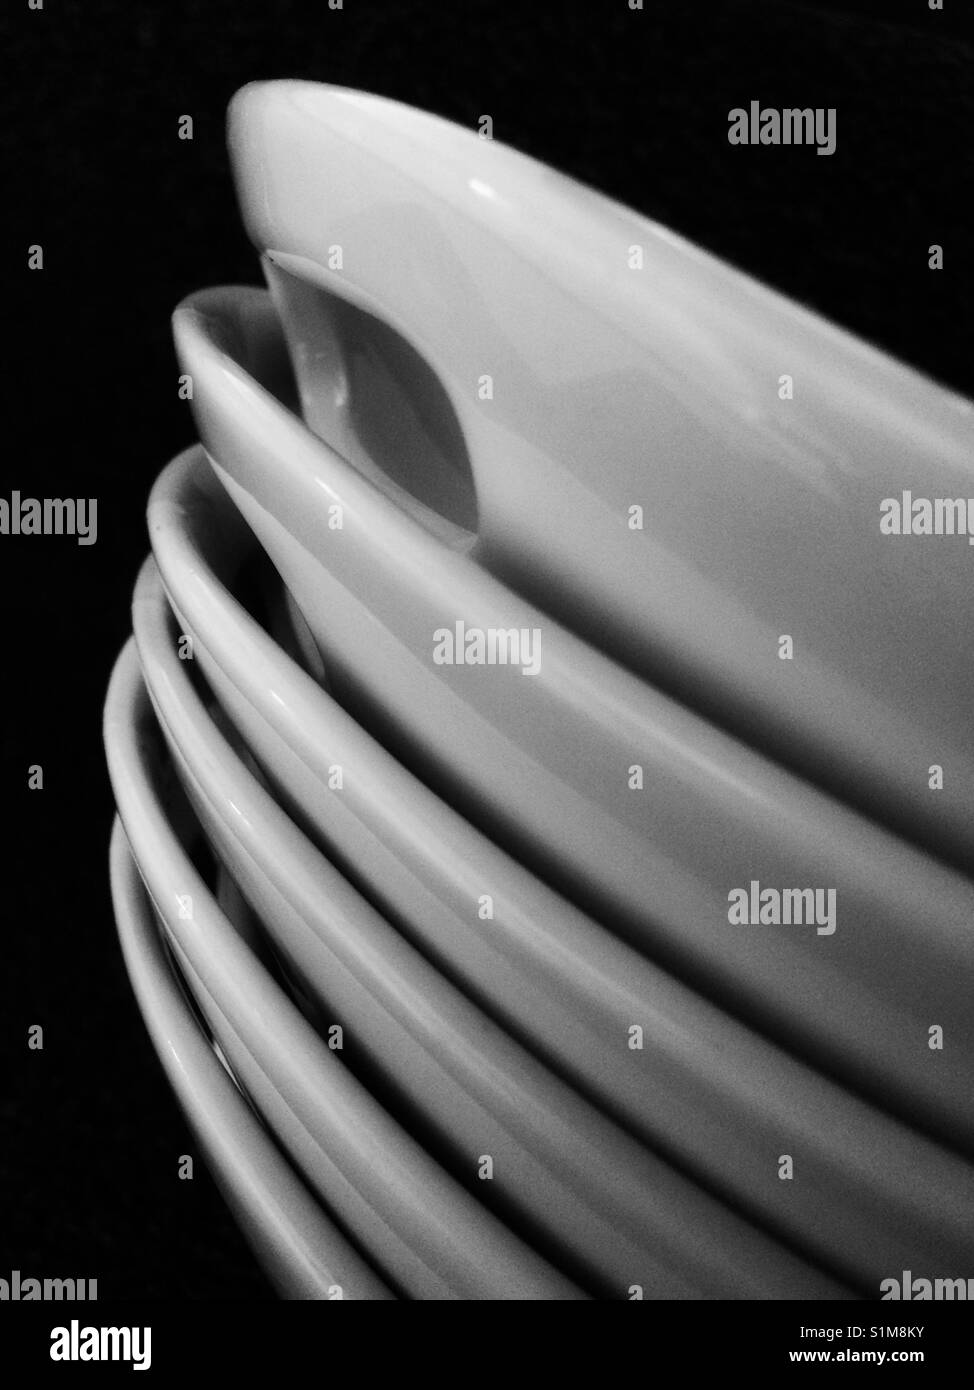 White dishes in a pile Stock Photo